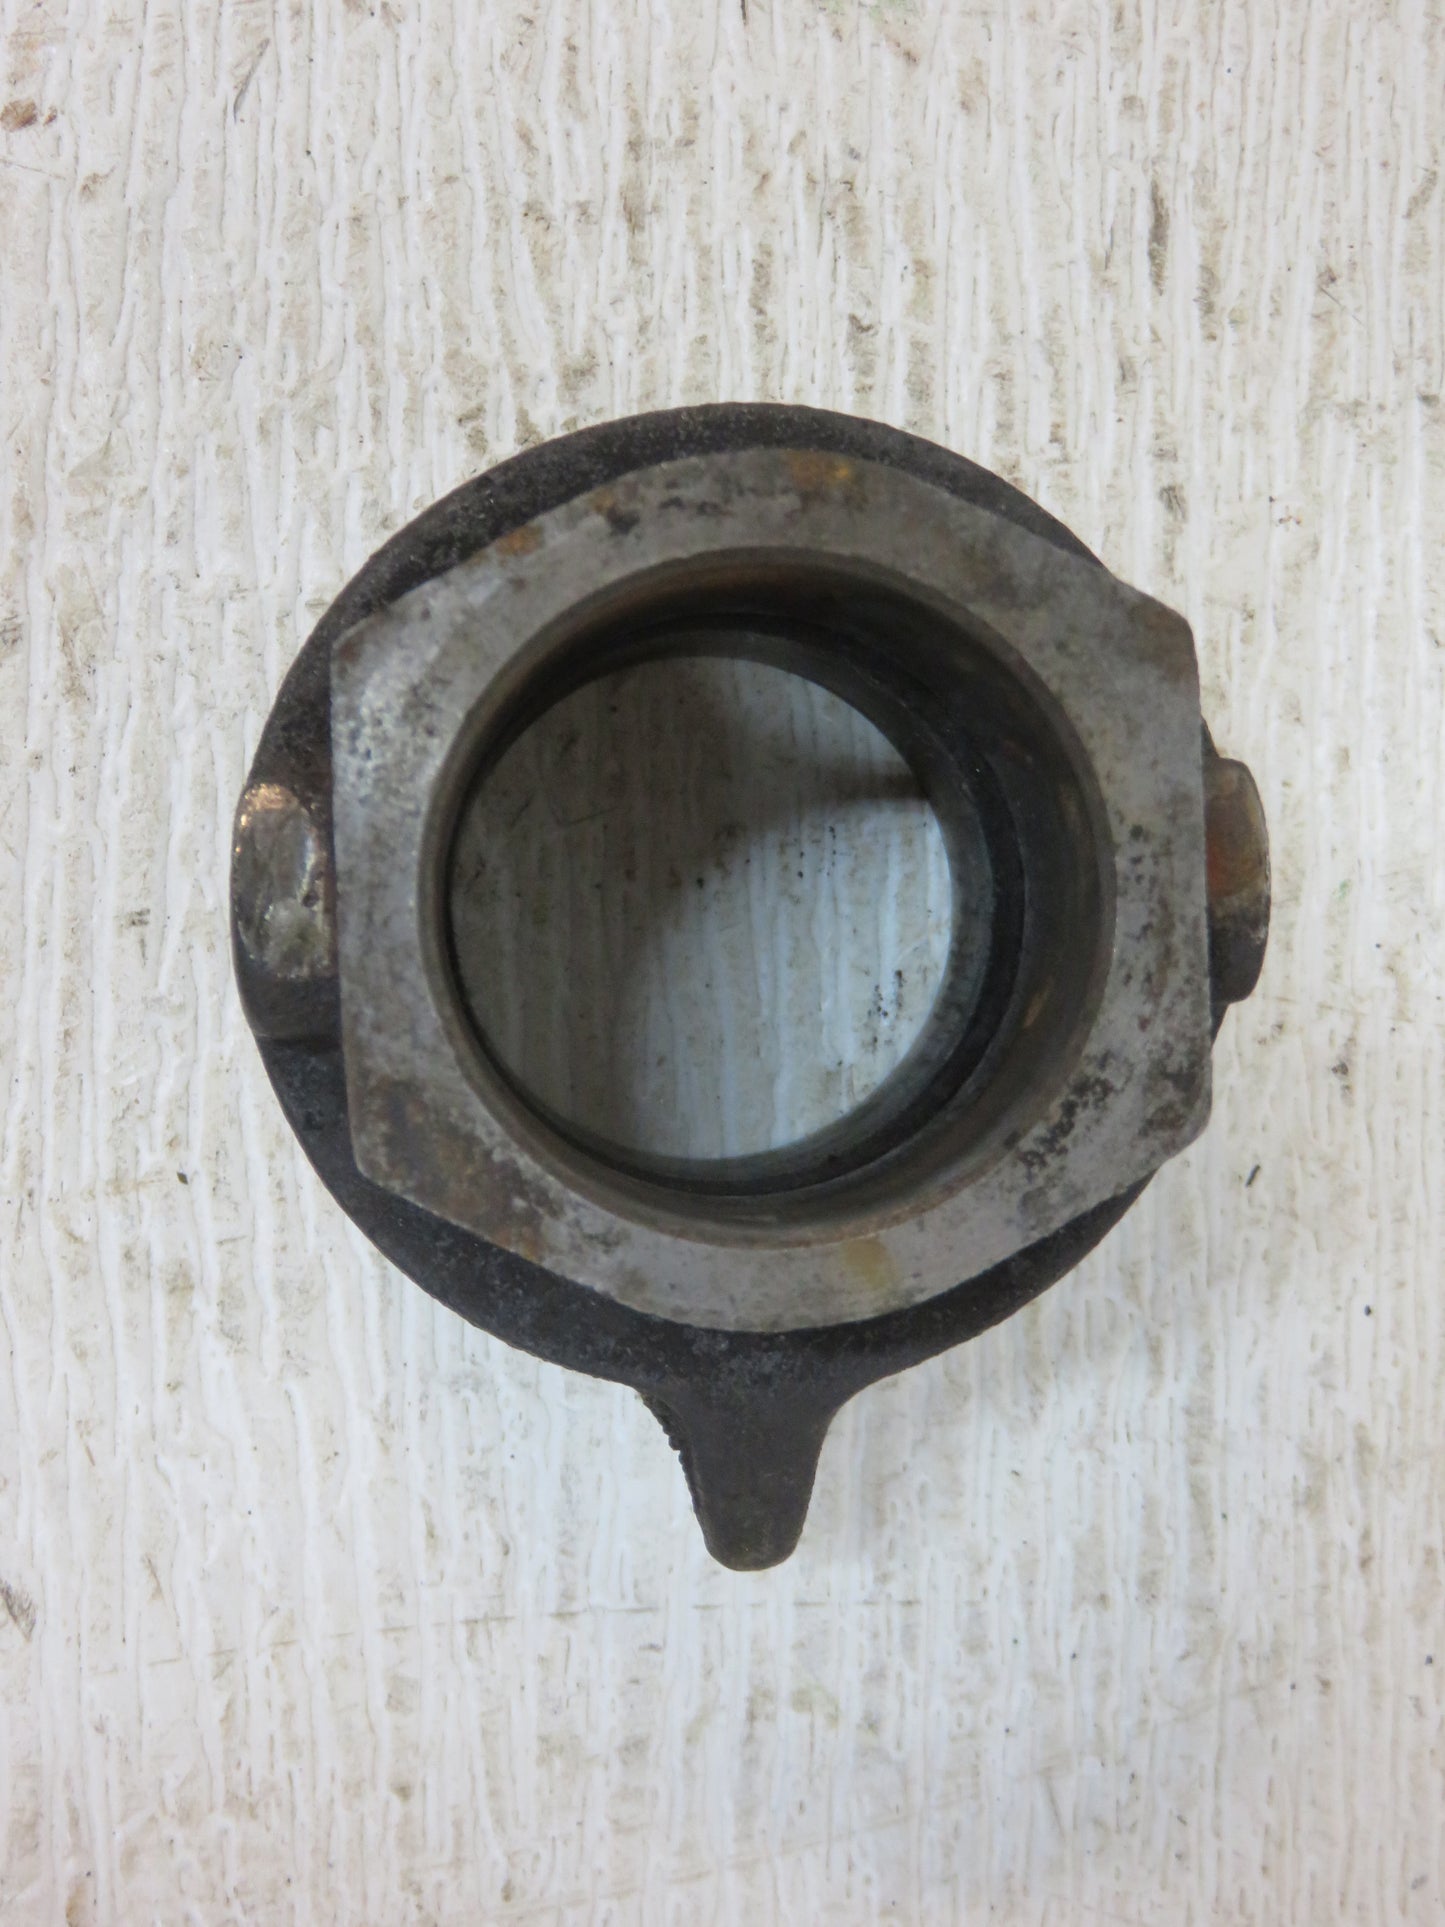 M57T, AM645T John Deere Clutch Throw Out Bearing Carrier For M, 40, 320, 420, 330